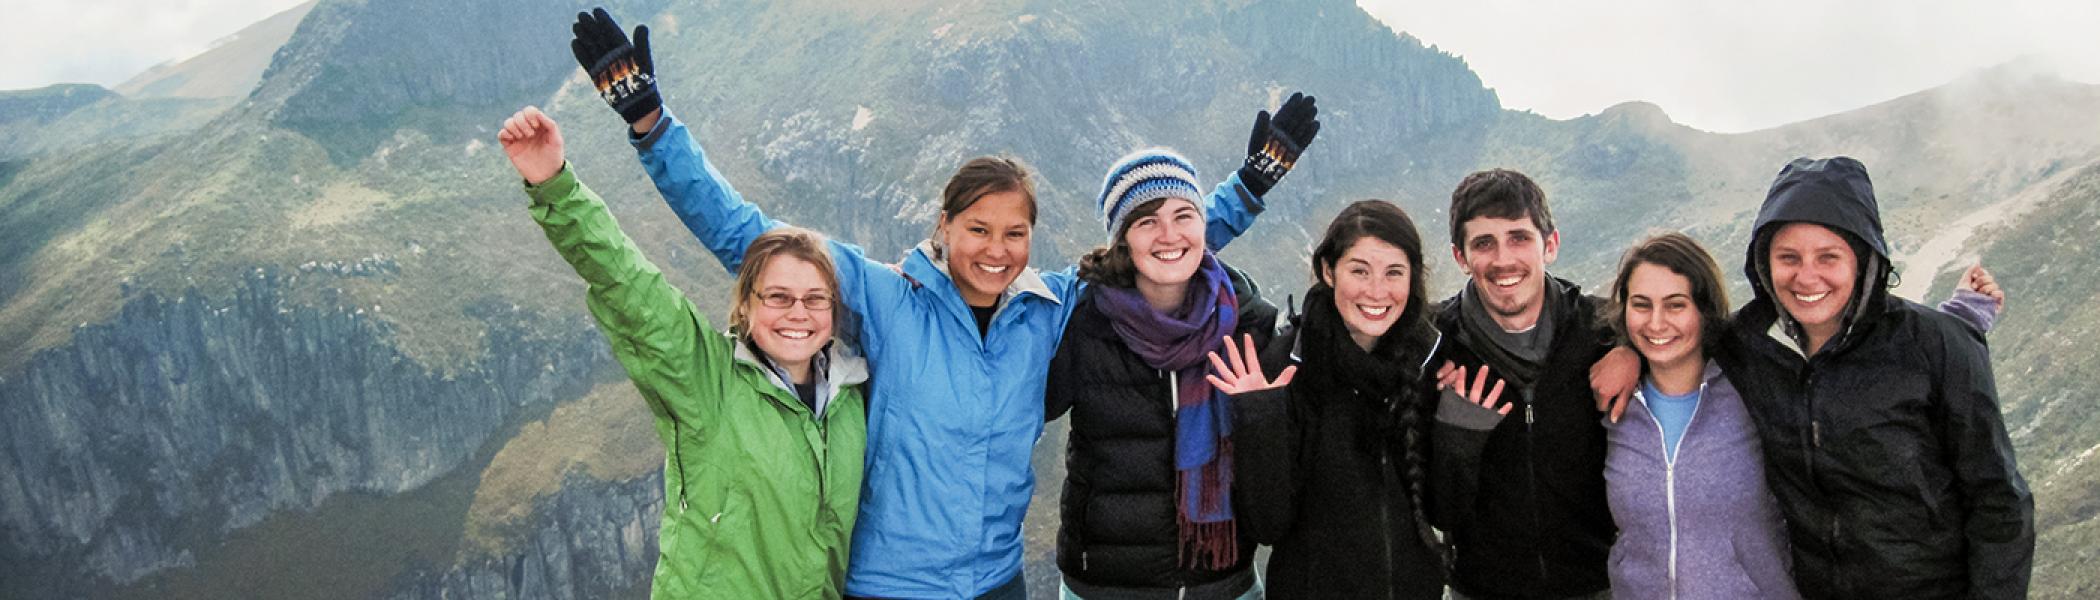 Group of 7 students standing on a mountain smiling at the camera